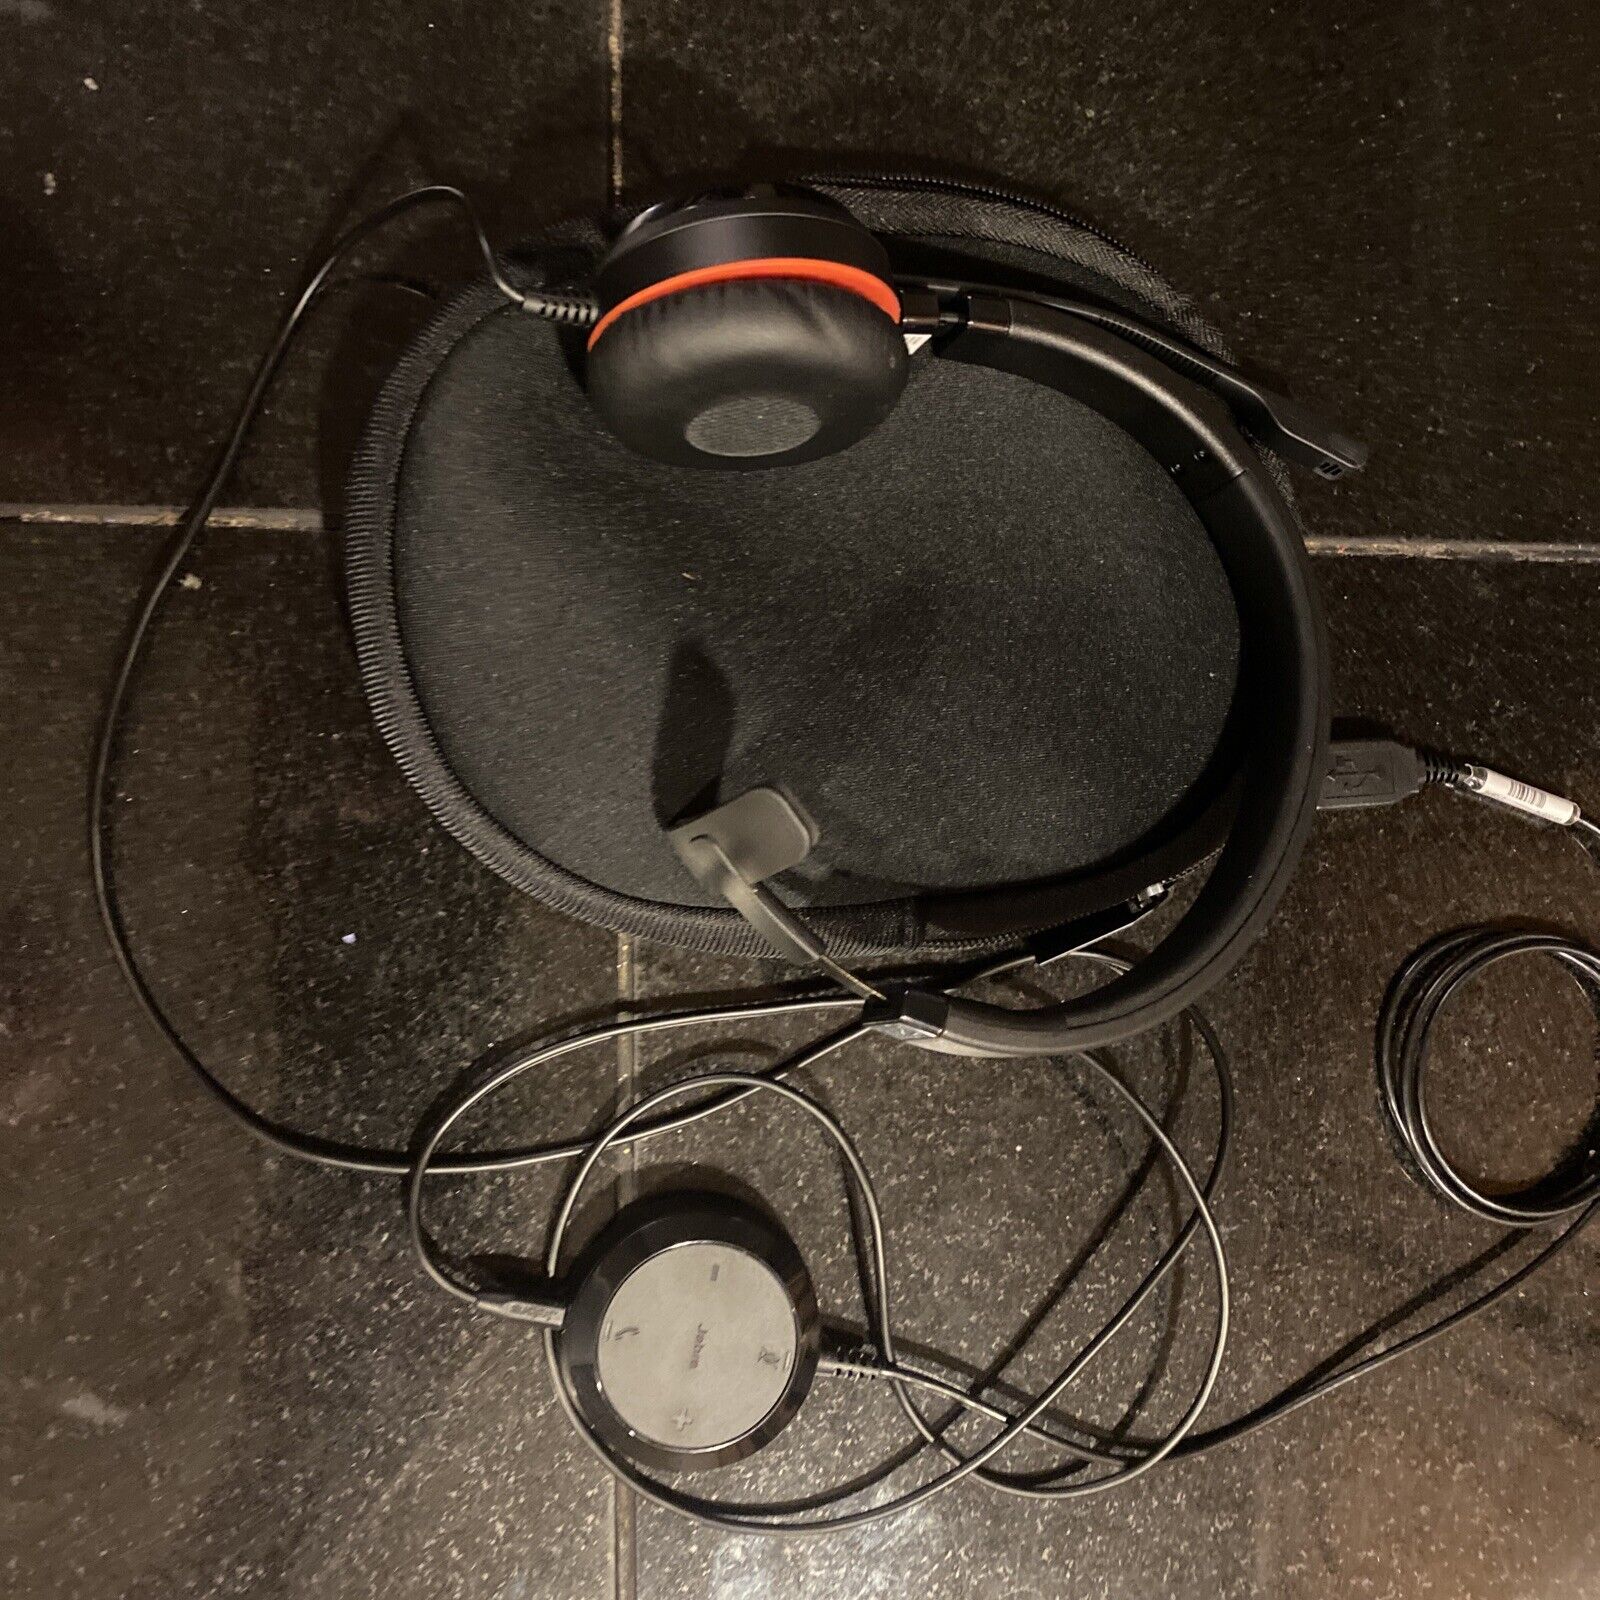 CE JABRA headset with carrying pouch